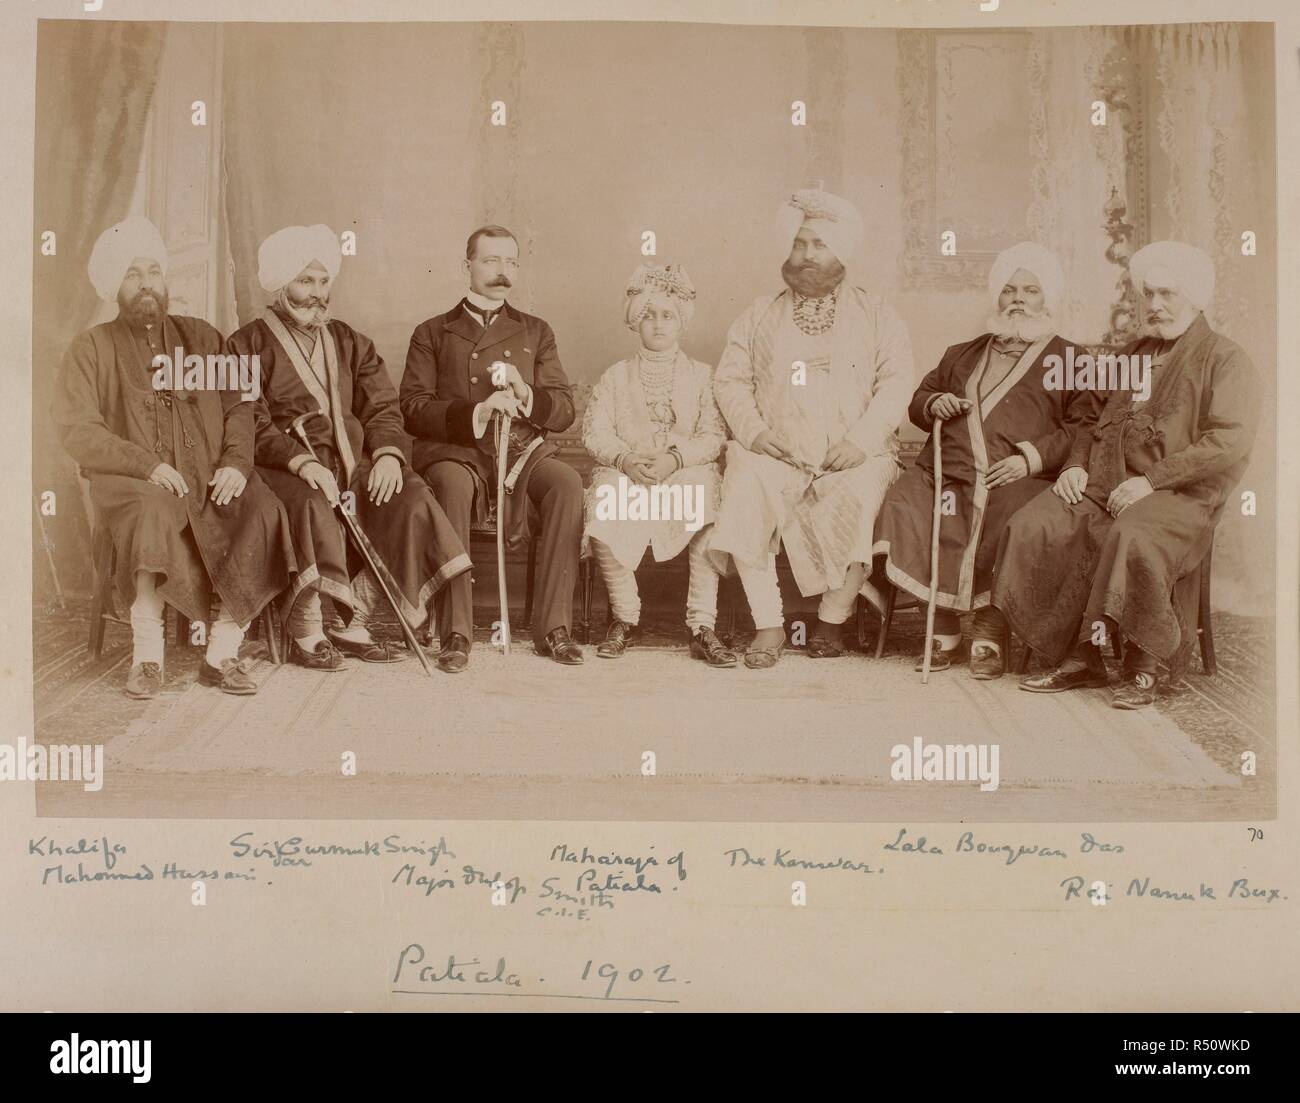 Photograph of the Maharaja of Patiala with J.R. Dunlop Smith and state  officials, Patiala, 1902. Sitters are named, from left: 'Khalifa Mahomed  Hussain; Sirdar Gurmuk Singh; Major Dunlop Smith, CIE; Maharaja of